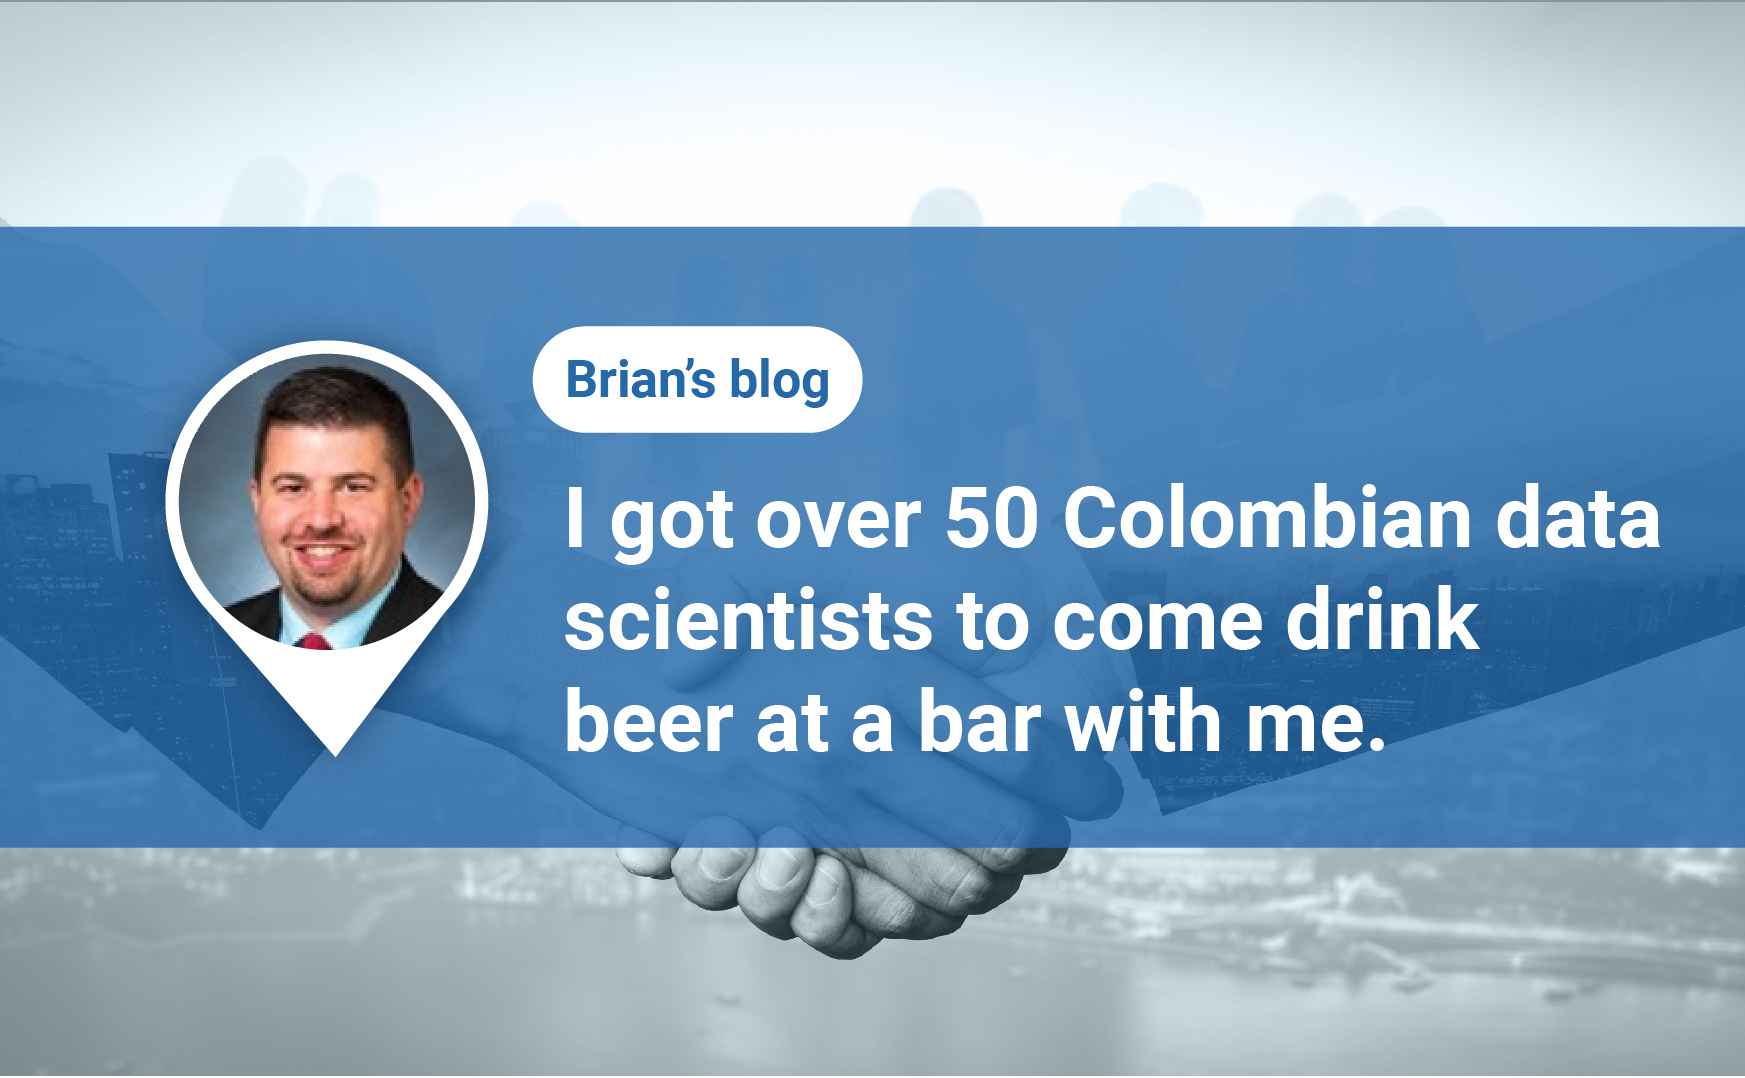 I got over 50 Colombian data scientists to come drink beer at a bar with me.